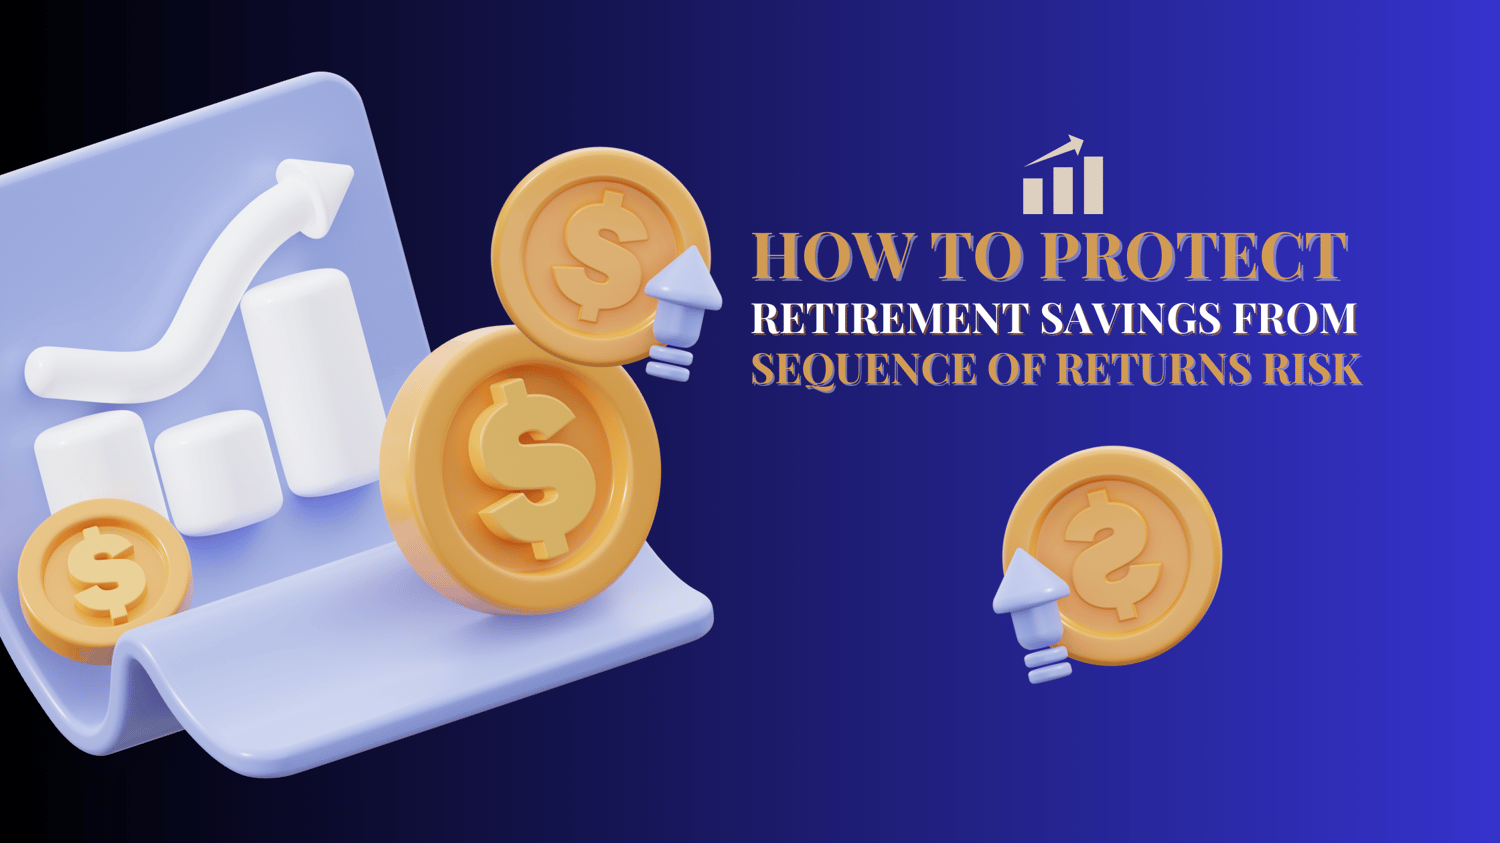 HOW TO PROTECT RETIREMENT SAVINGS FROM SEQUENCE OF RETURNS RISK